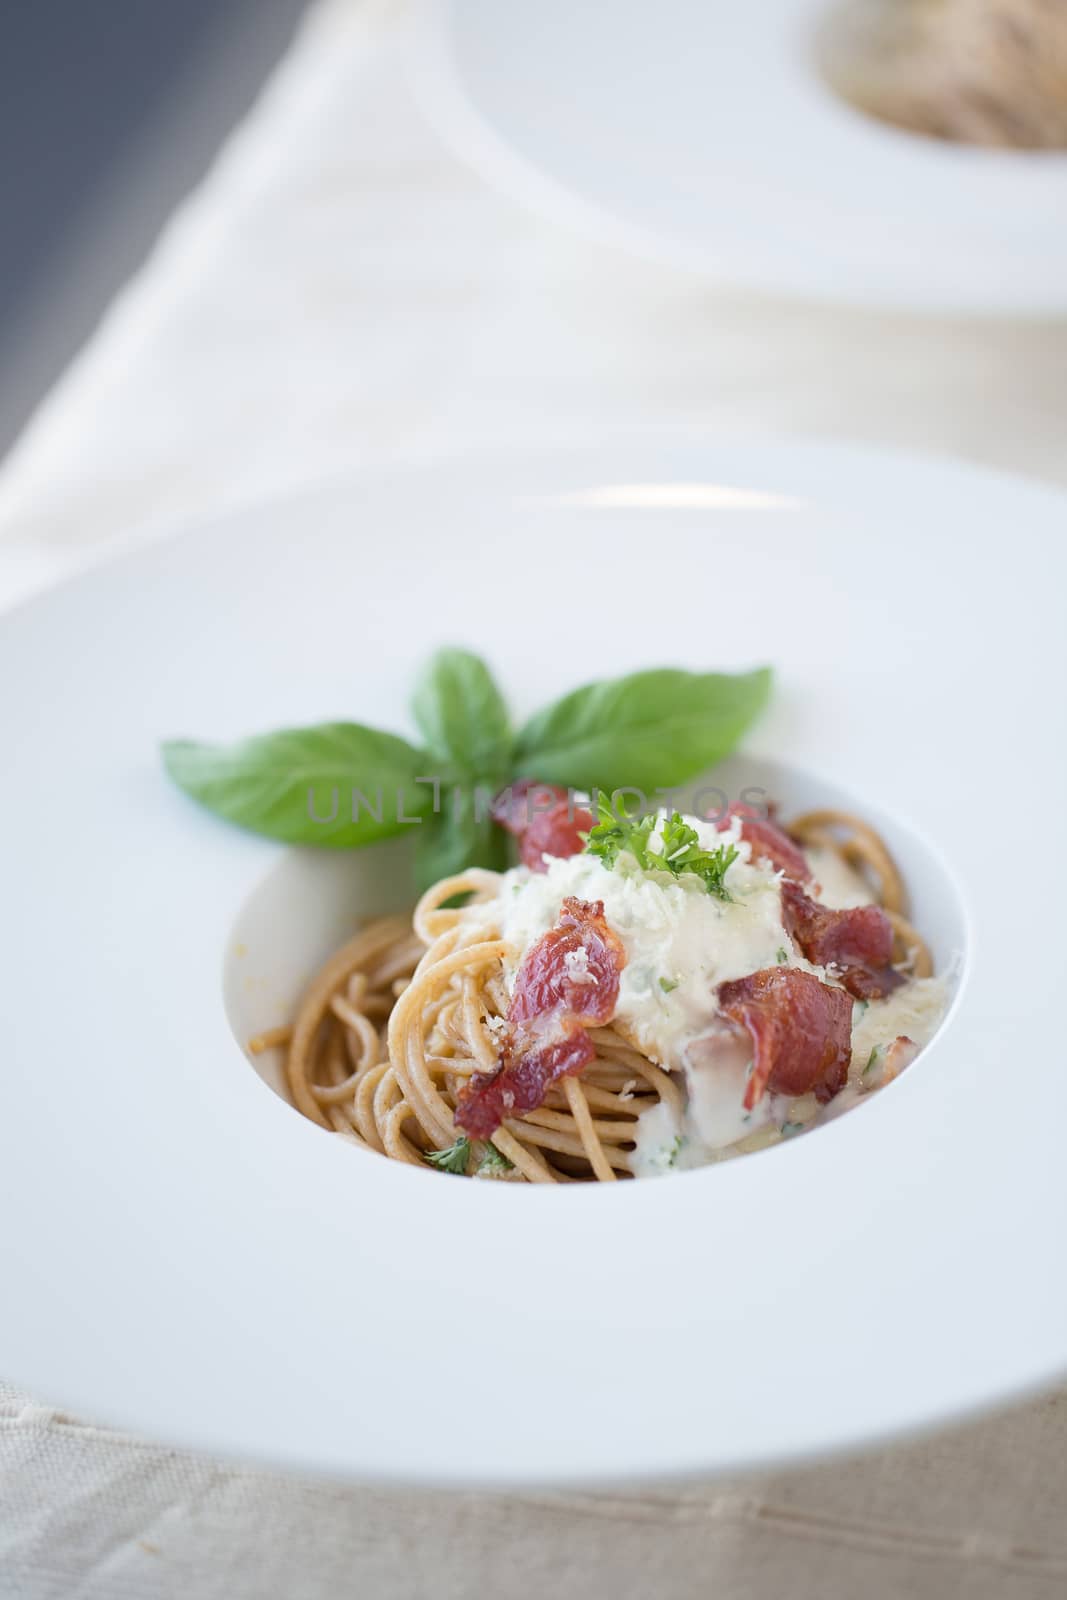 Spaghetti carbonara with bacon and cheese on white plate.